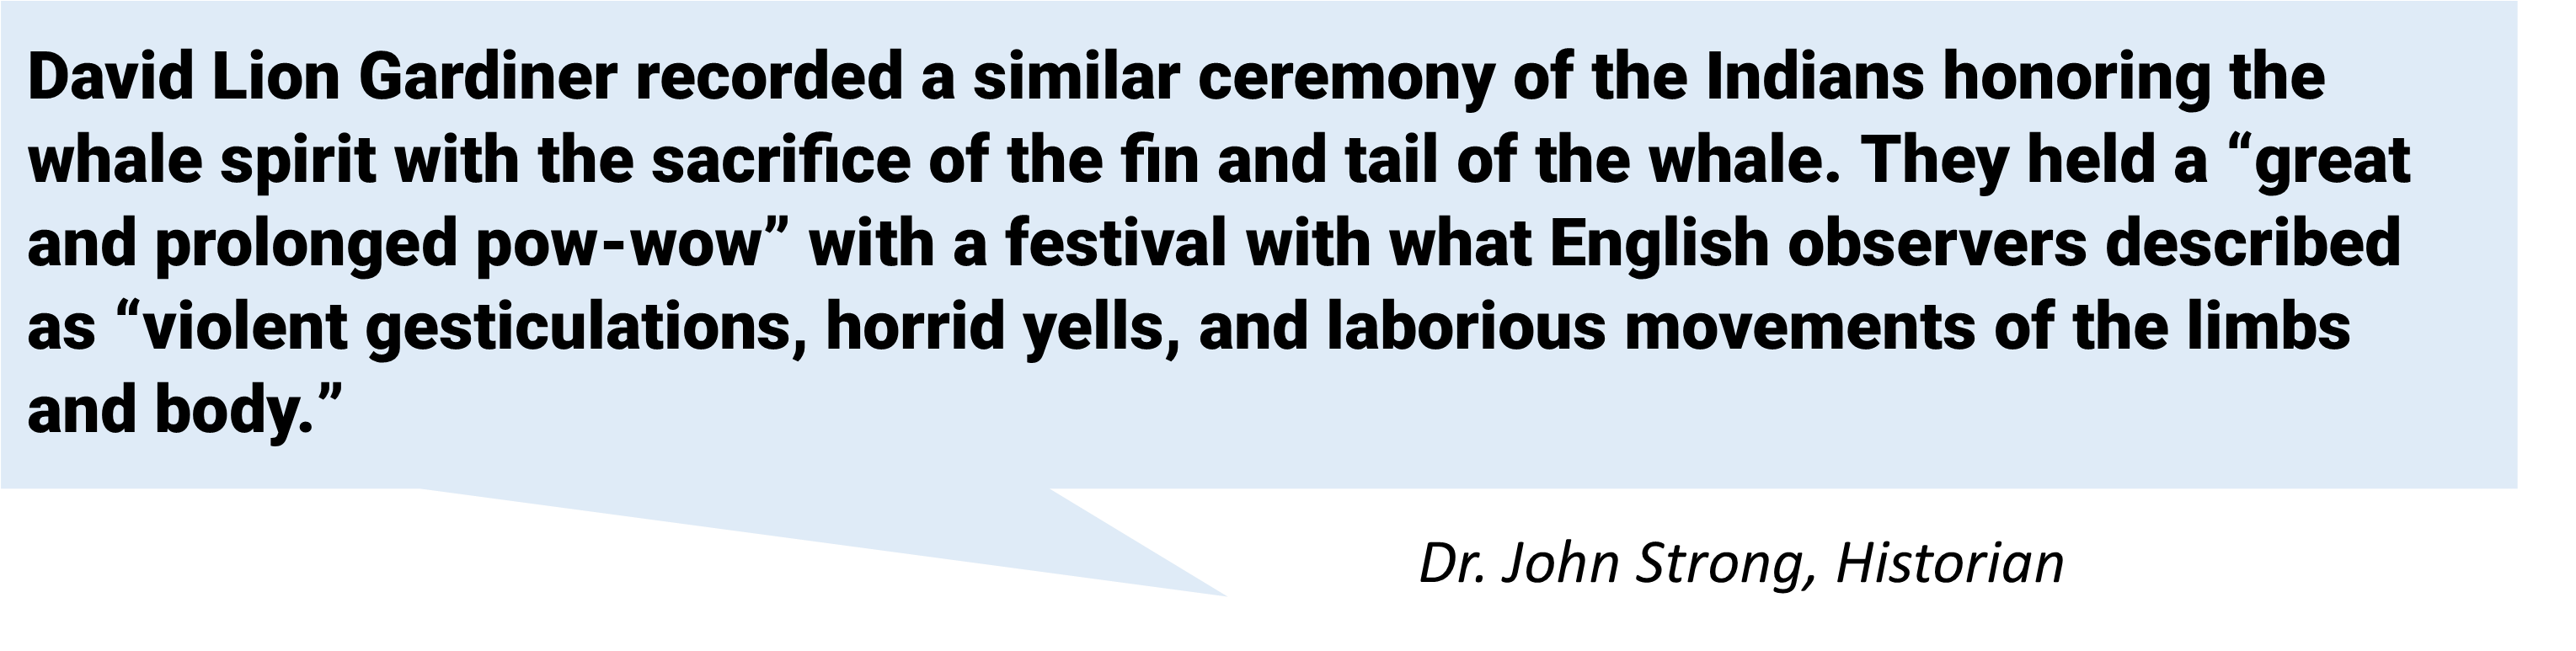 David Lion Gardiner recorded a similar ceremony of the Indians honoring the whale spirit with the sacrifice of the fin and tail of the whale. They held a “great and prolonged pow-wow” with a festival with what English observers described as “violent gesticulations, horrid yells, and laborious movements of the limbs and body.”